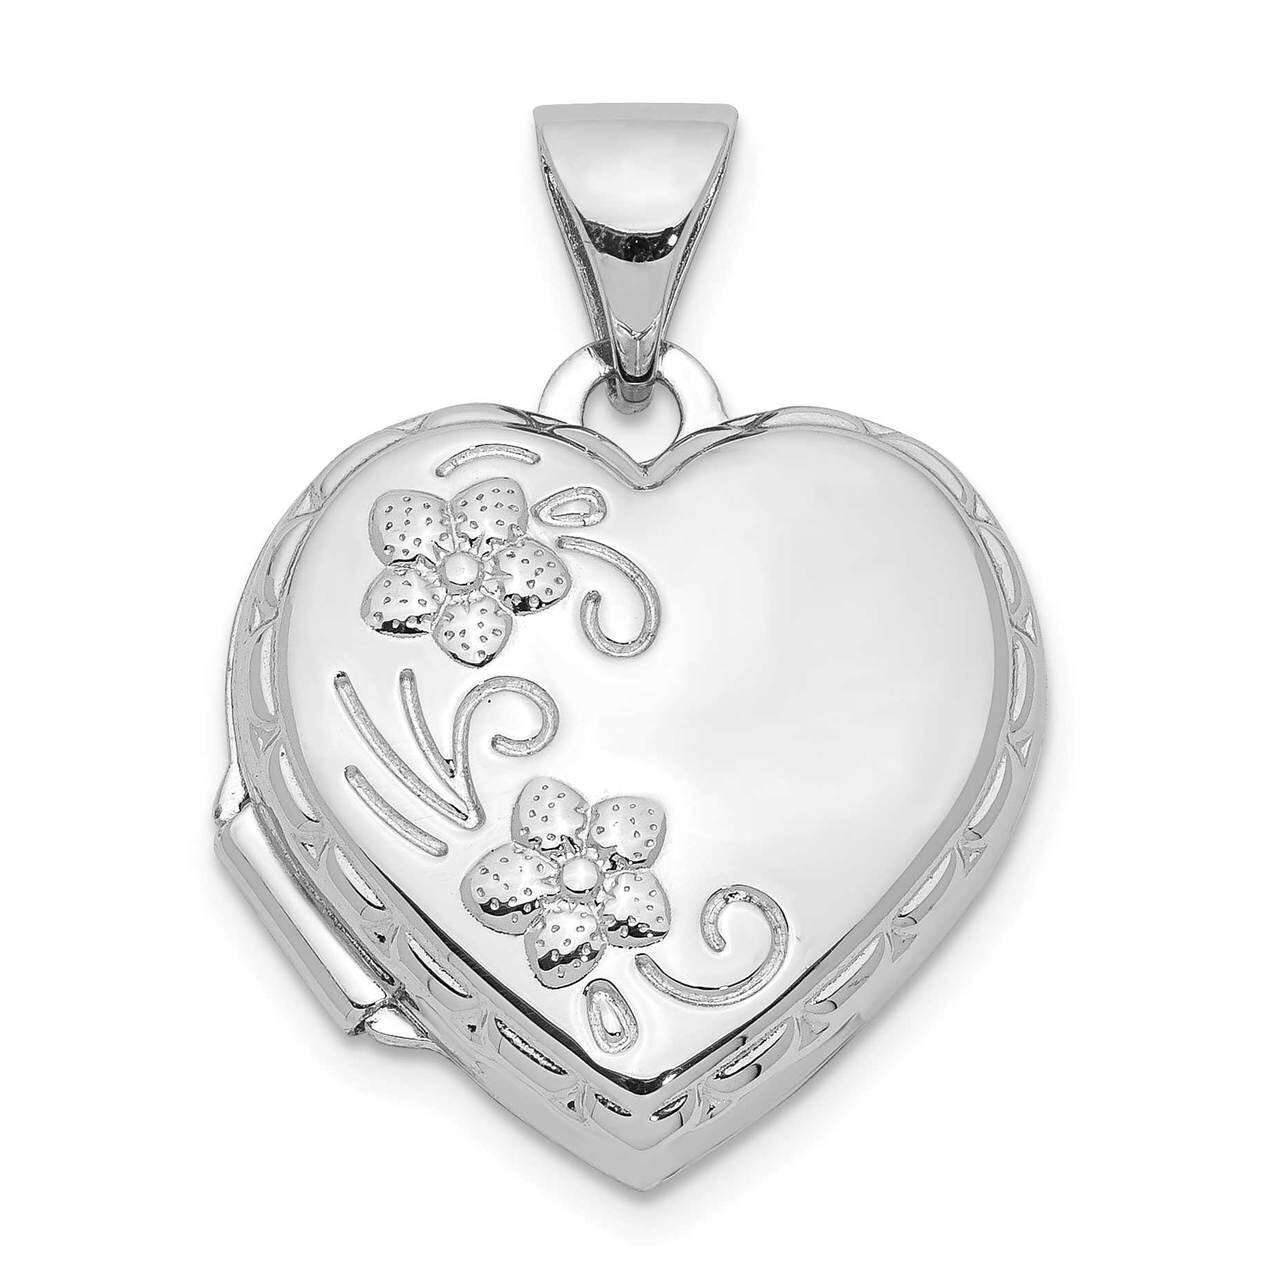 15mm Floral Heart Locket Sterling Silver Rhodium-plated QLS905